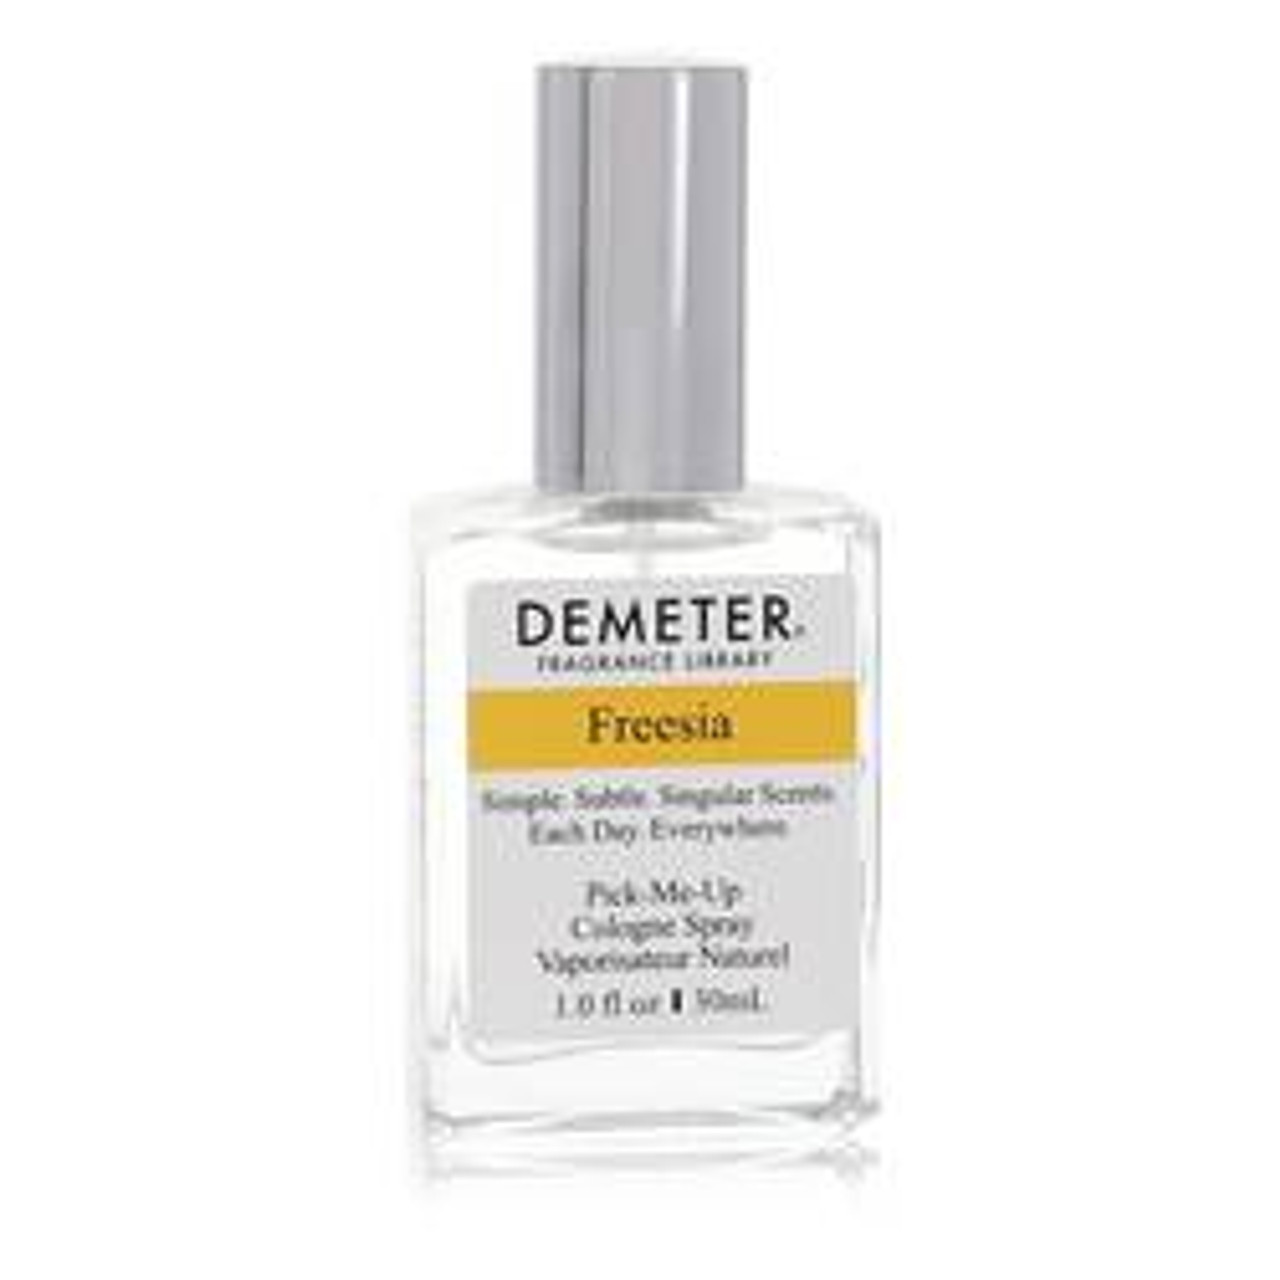 Demeter Freesia Perfume By Demeter Cologne Spray (unboxed) 1 oz for Women - [From 55.00 - Choose pk Qty ] - *Ships from Miami